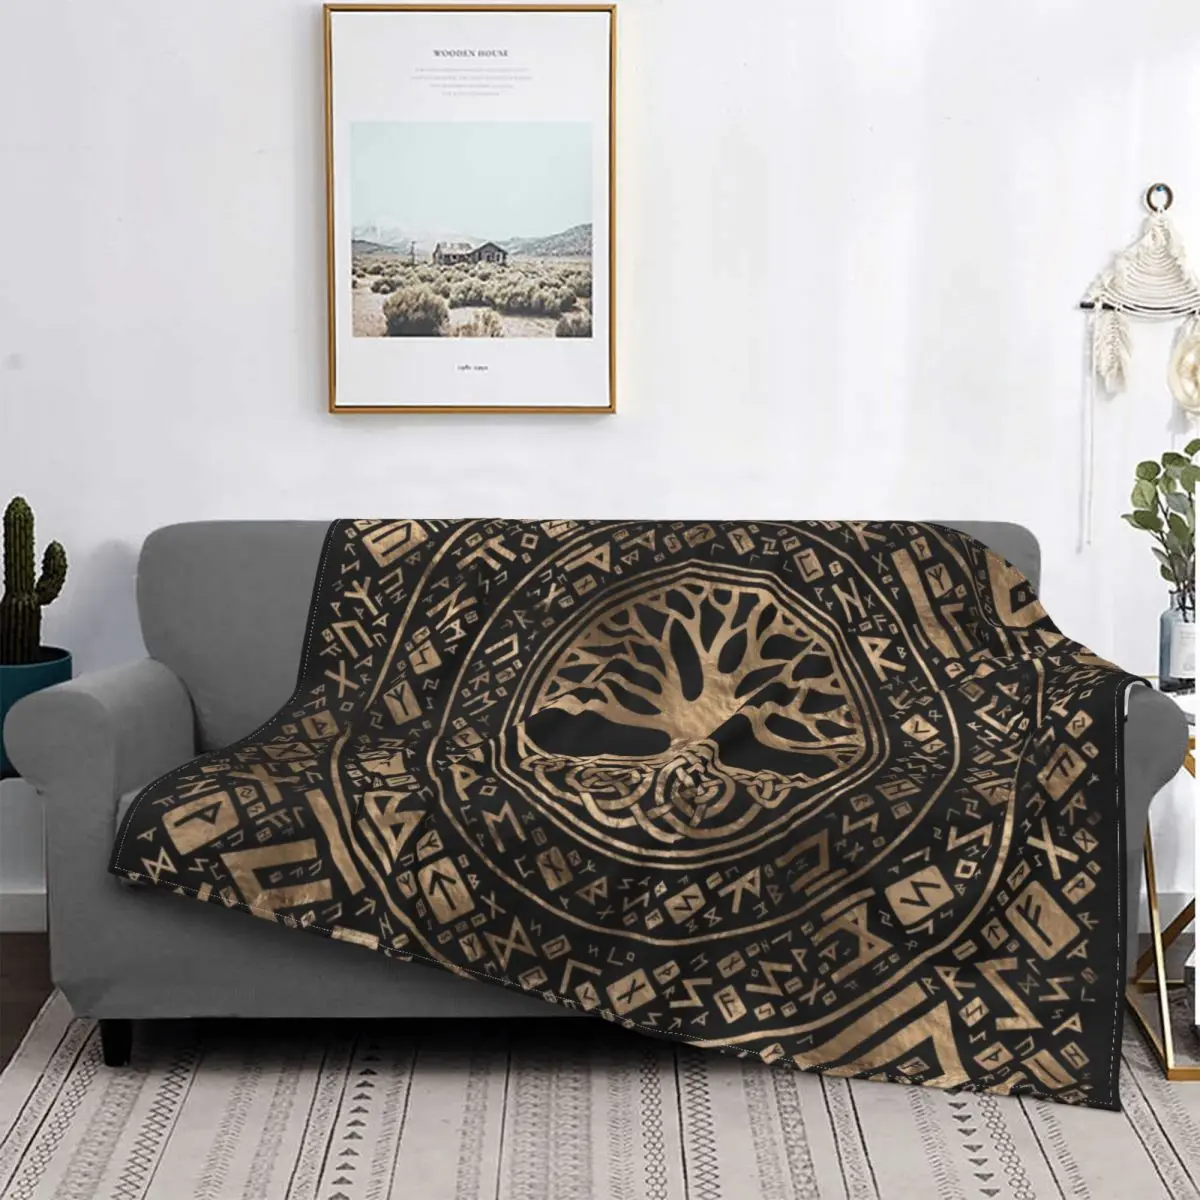 

Tree Of Life Yggdrasil Runic Pattern Blanket Warm Fleece Soft Flannel Viking Norse Symbol Throw Blankets for Bedding Car Autumn